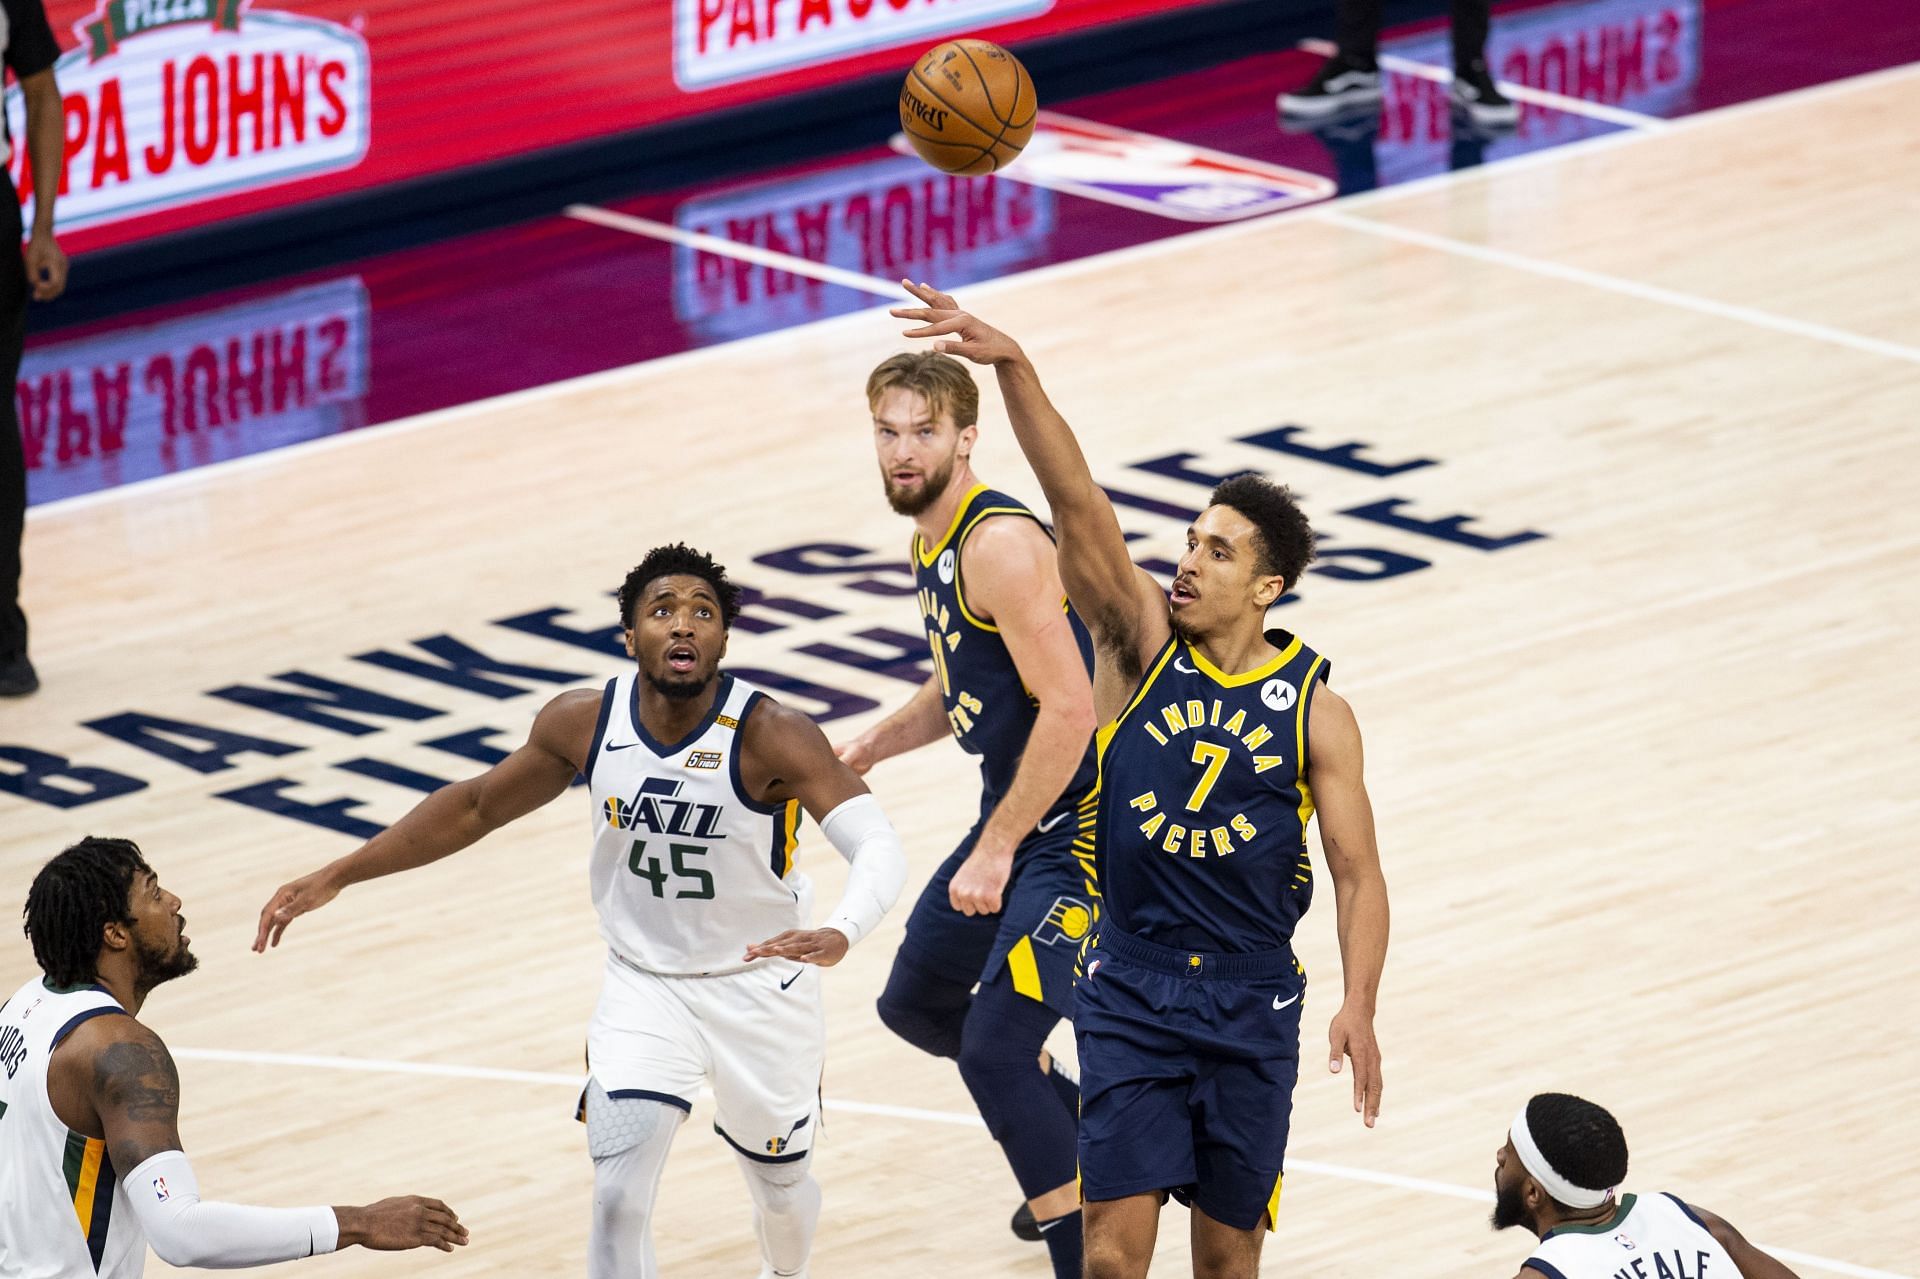 Utah Jazz will lock horns with the Indiana Pacers on Saturday